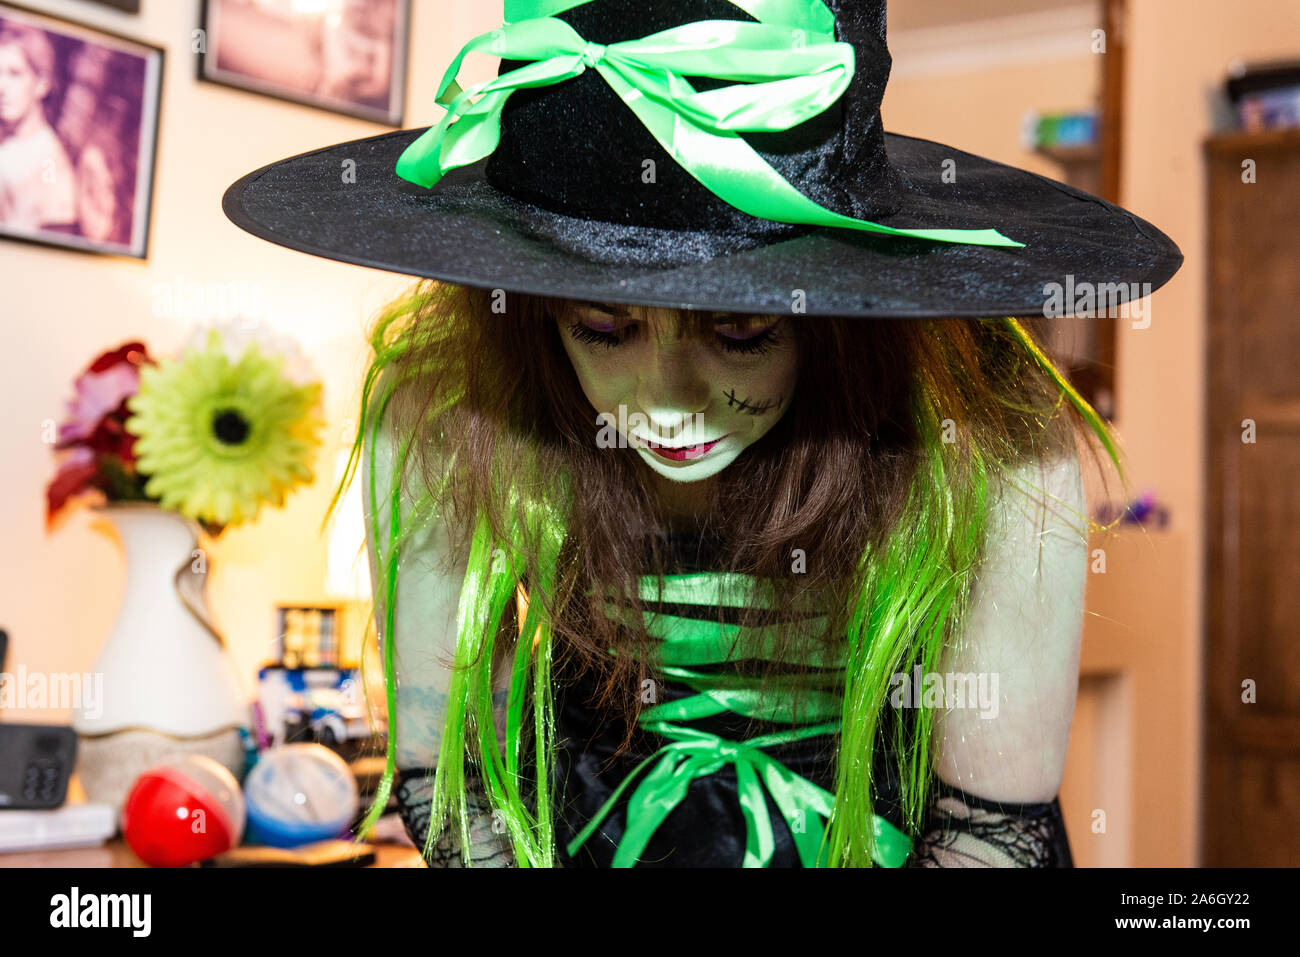 Wicked Witch Costume & Makeup